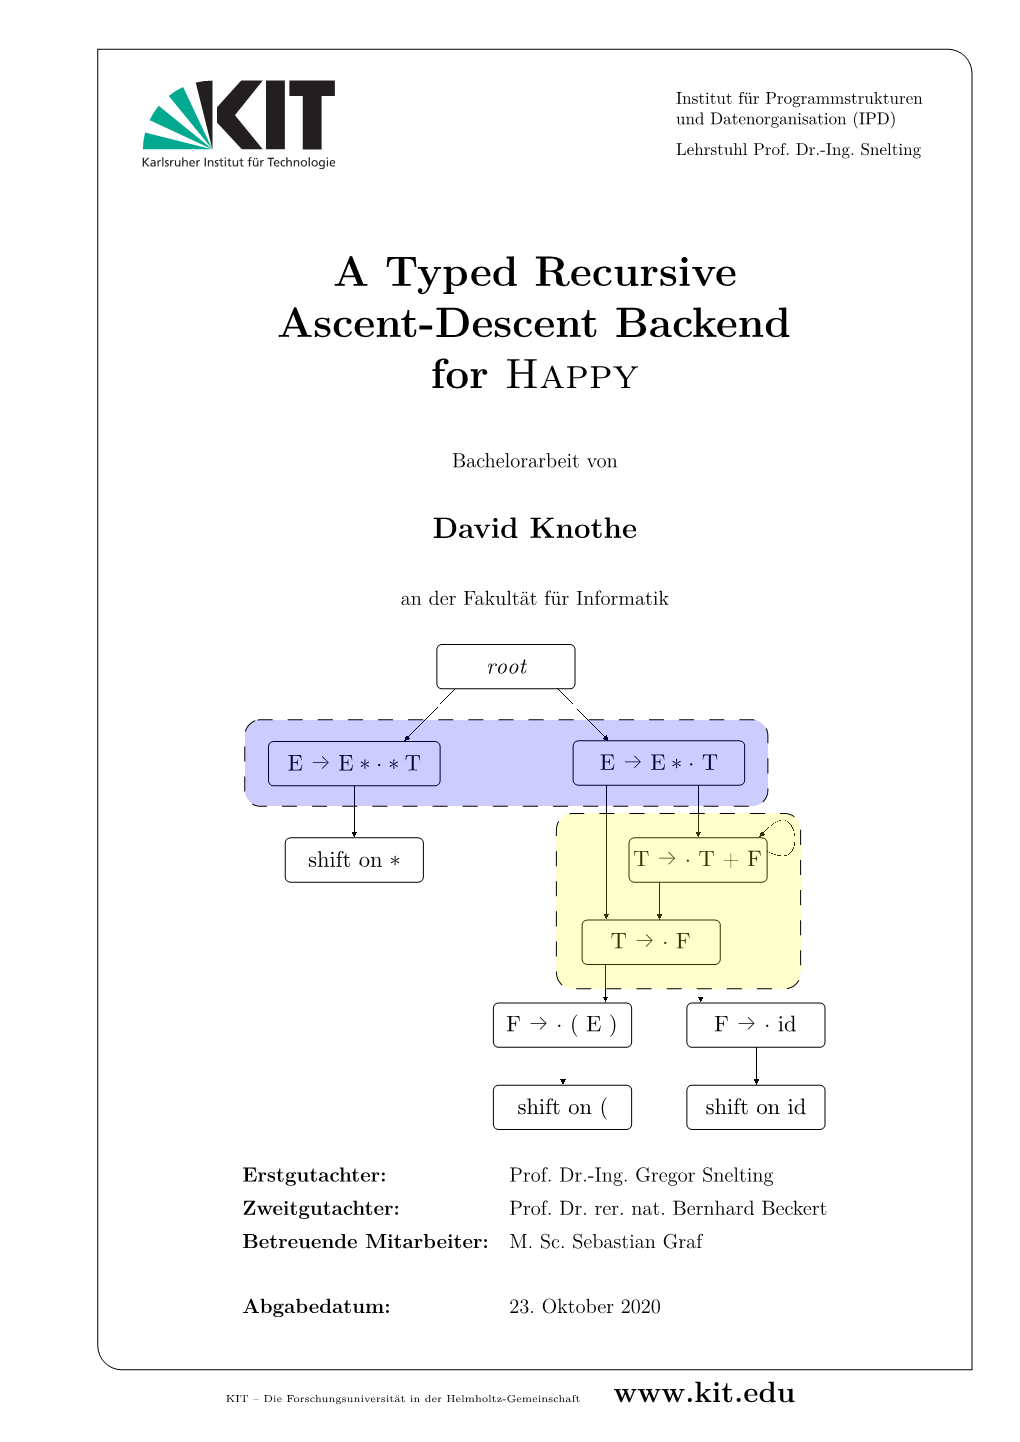 A Typed Recursive Ascent-Descent Backend for Happy